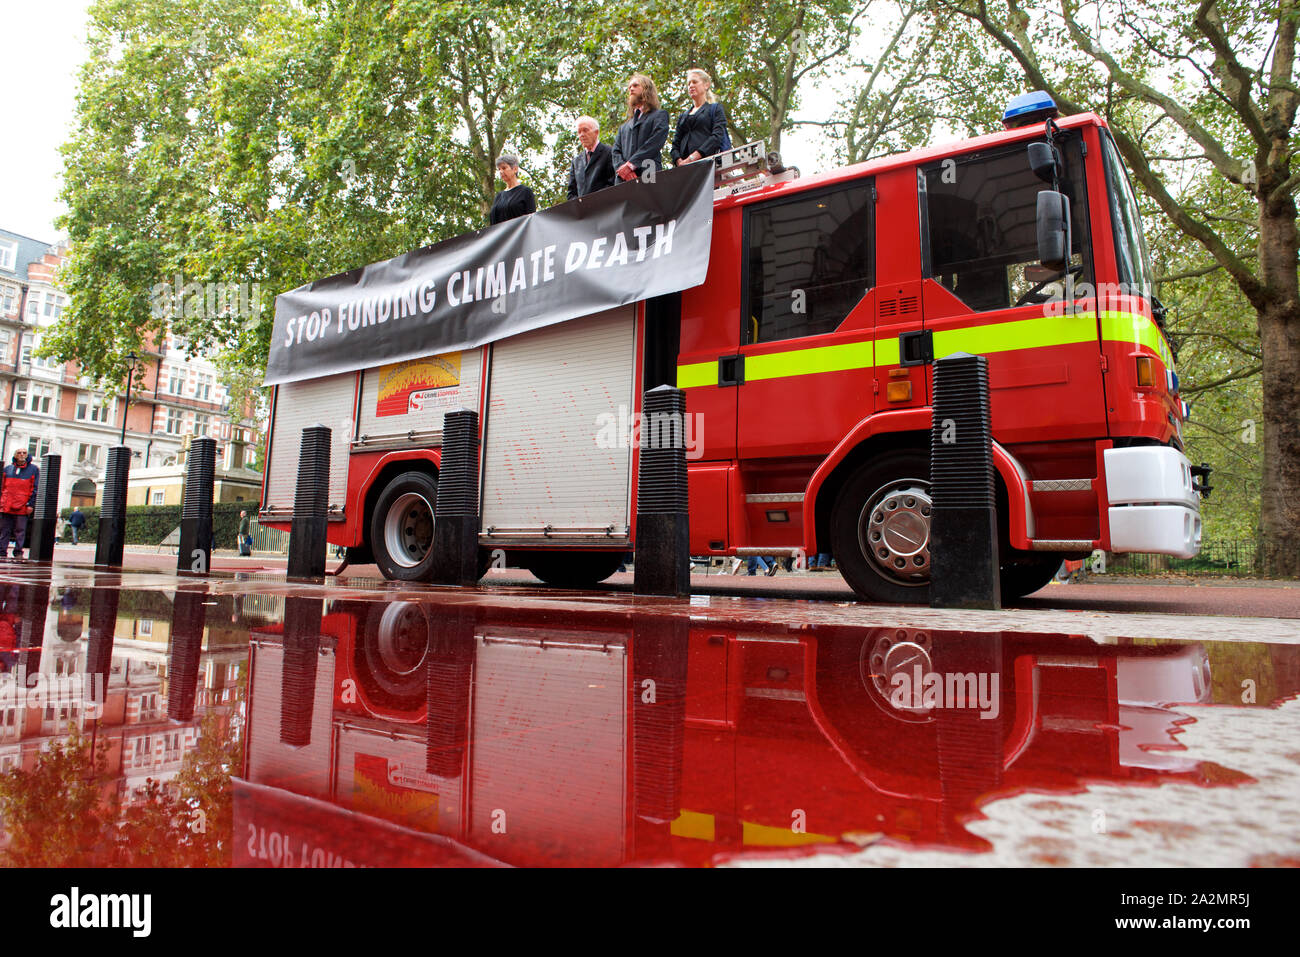 London, UK. 3rd October 2019. Extinction Rebellion activists use fire engine to spray 1,800 litres of fake blood over the front of the Treasury in LondonThe protest highlights the inconsistency between the UK government’s insistence that the UK is a world leader in tackling climate breakdown, and the vast sums it pours into fossil fuel exploration and carbon-intensive projects. Credit Gareth Morris/Alamy Live News Stock Photo